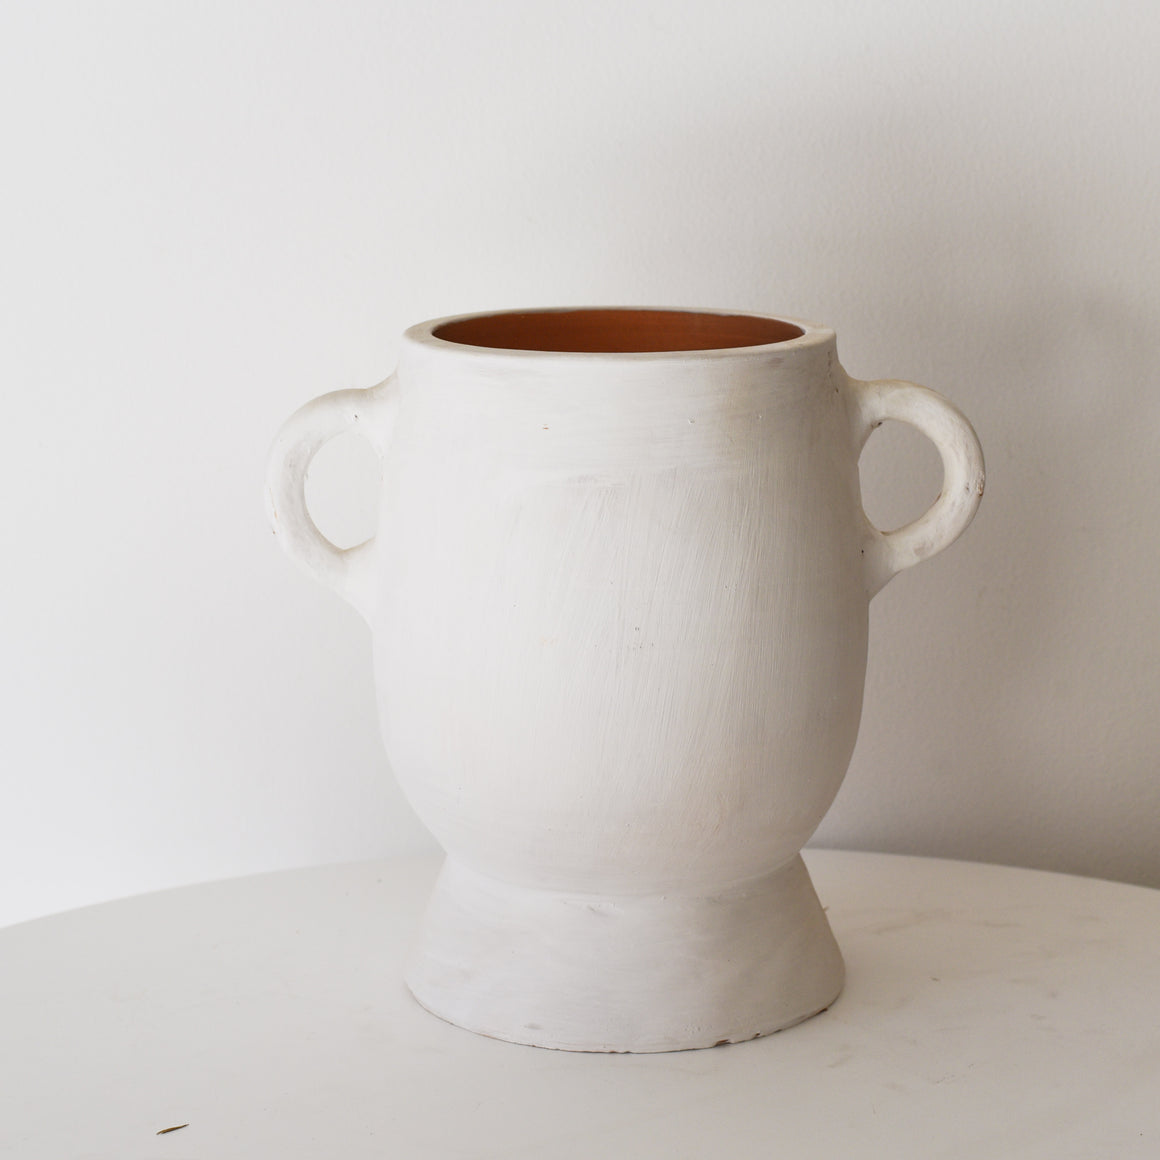 Earth Collection - Clara Ceramic Pot, white washed